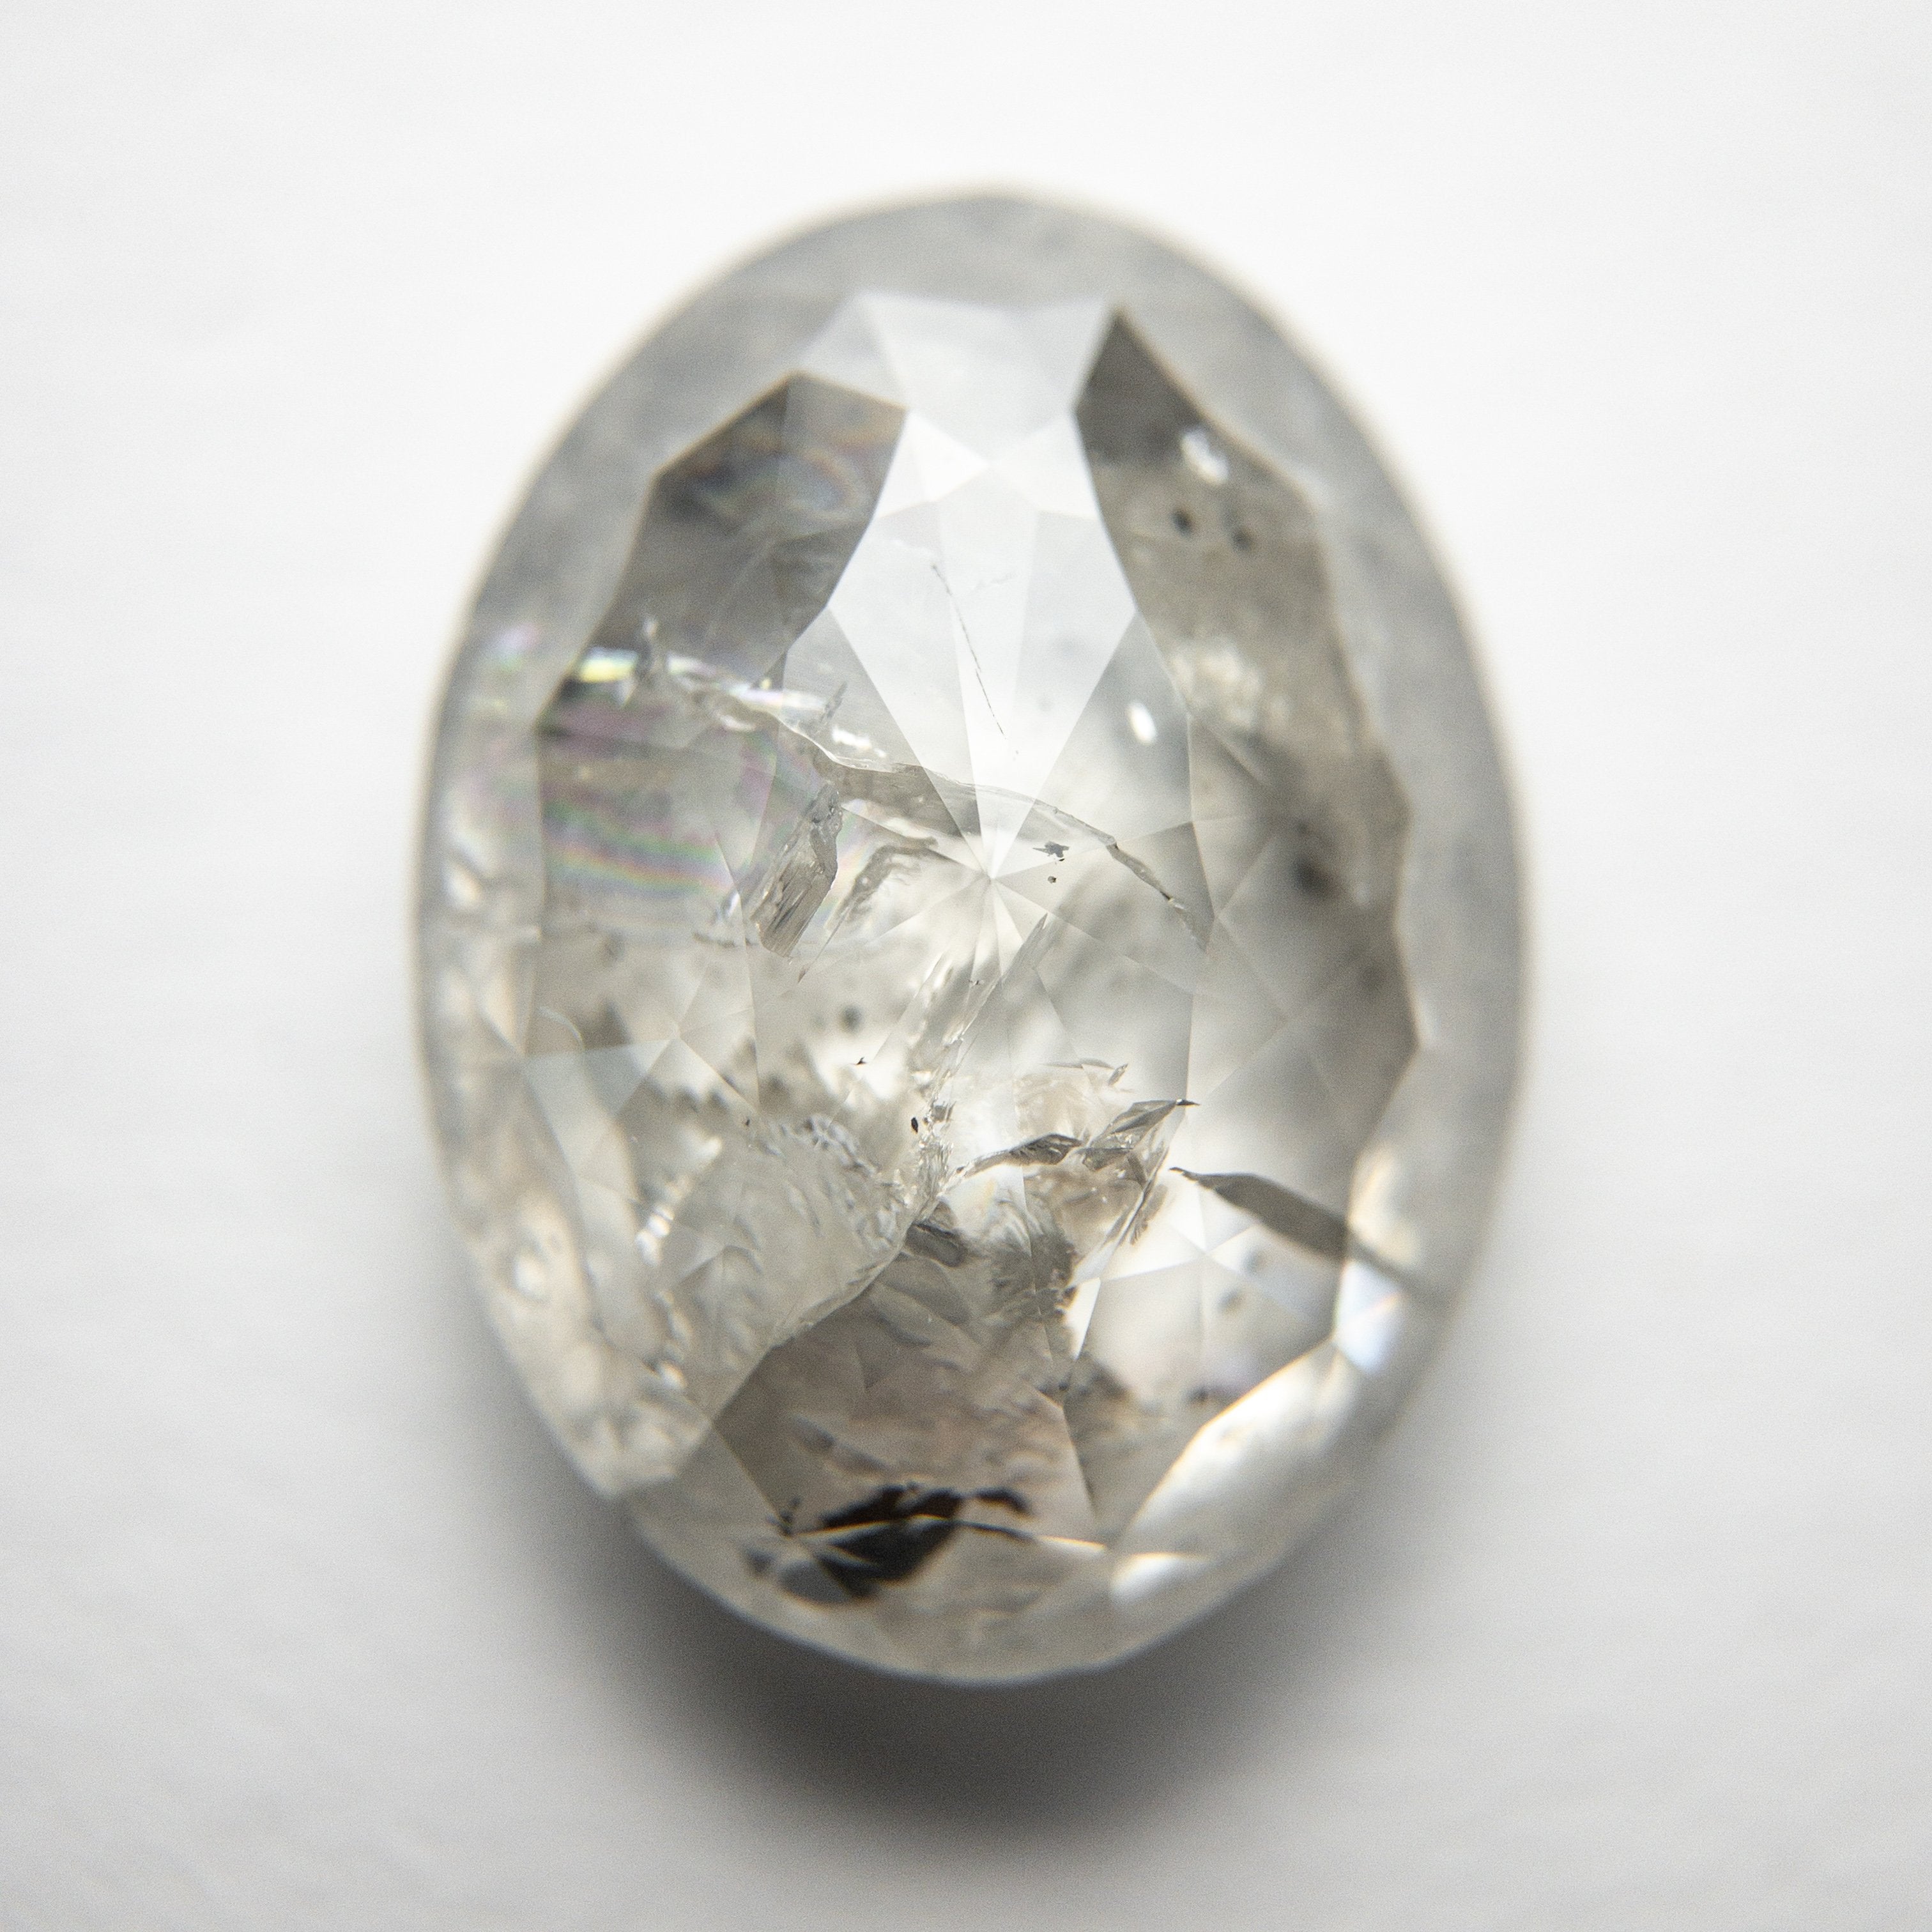 7.47ct 14.52x11.12x5.27mm Oval Double Cut 18312-01